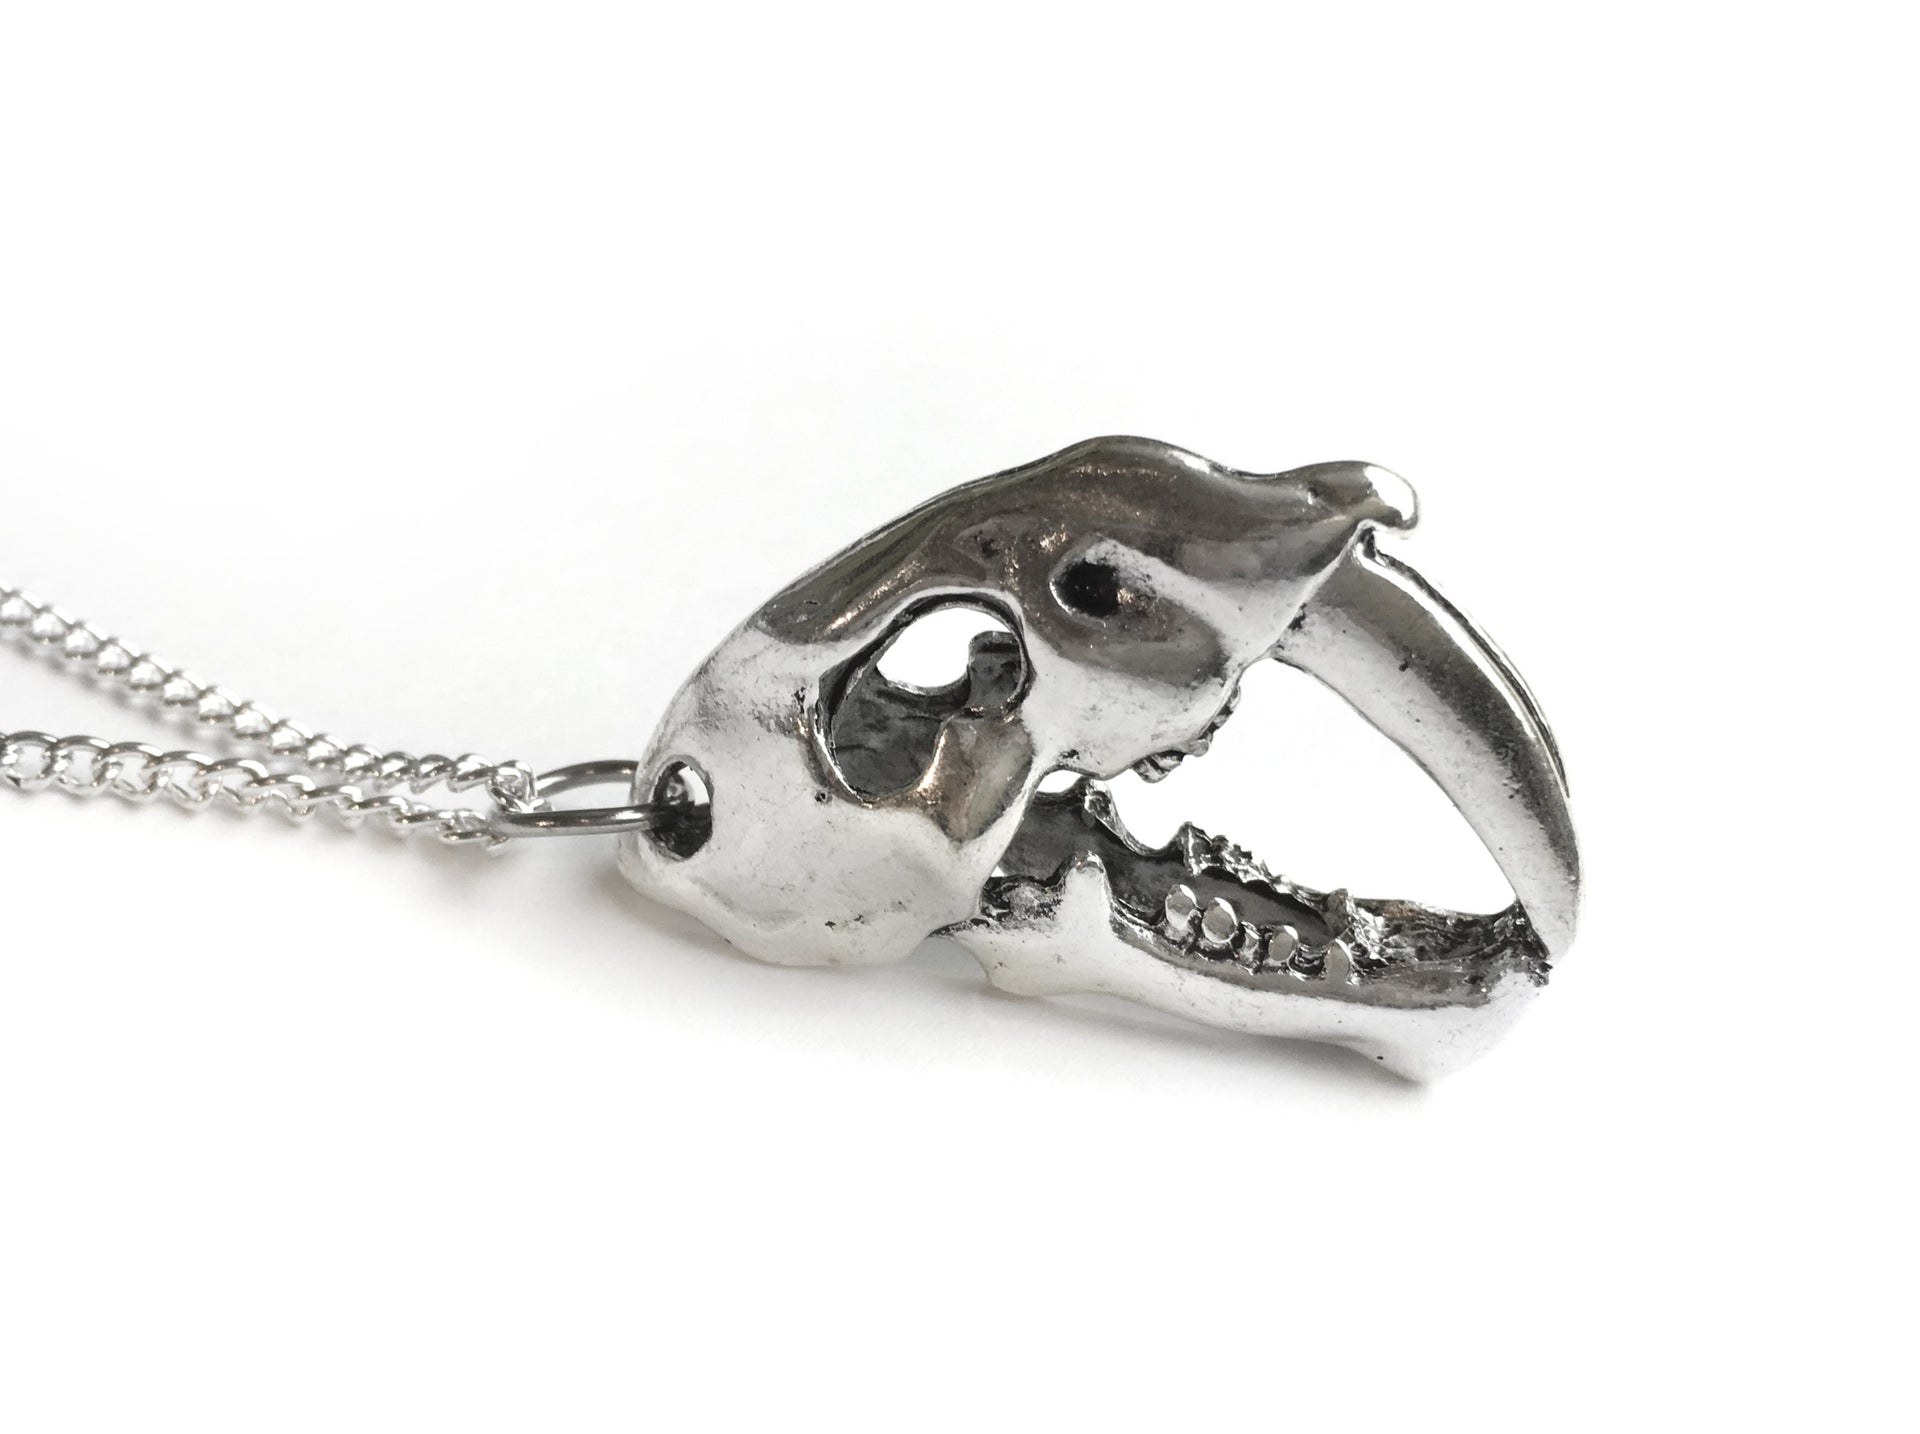 Saber-Toothed Tiger Skull Necklace - Fux Jewellery